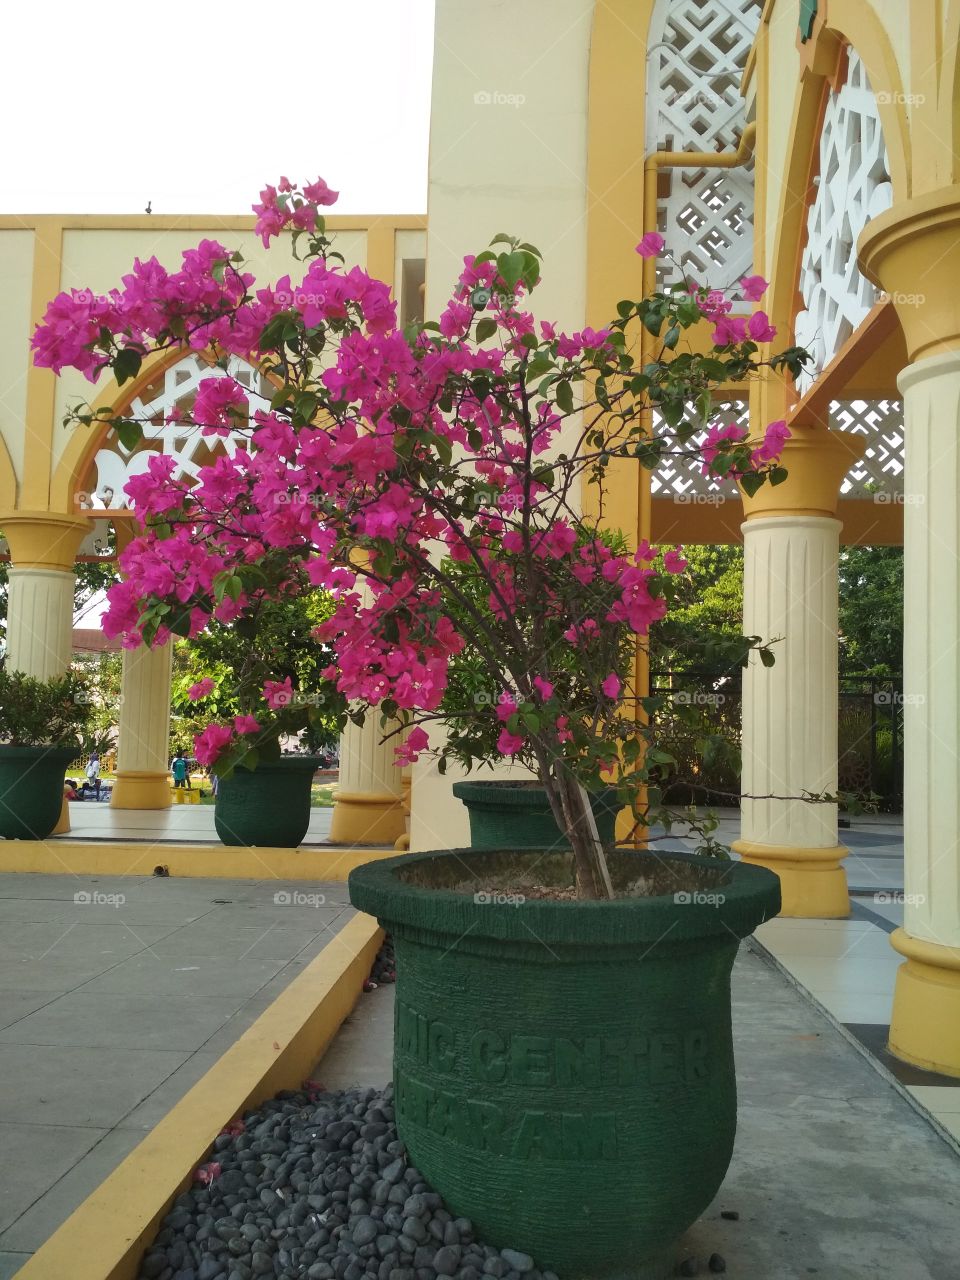 Flower at the mosque